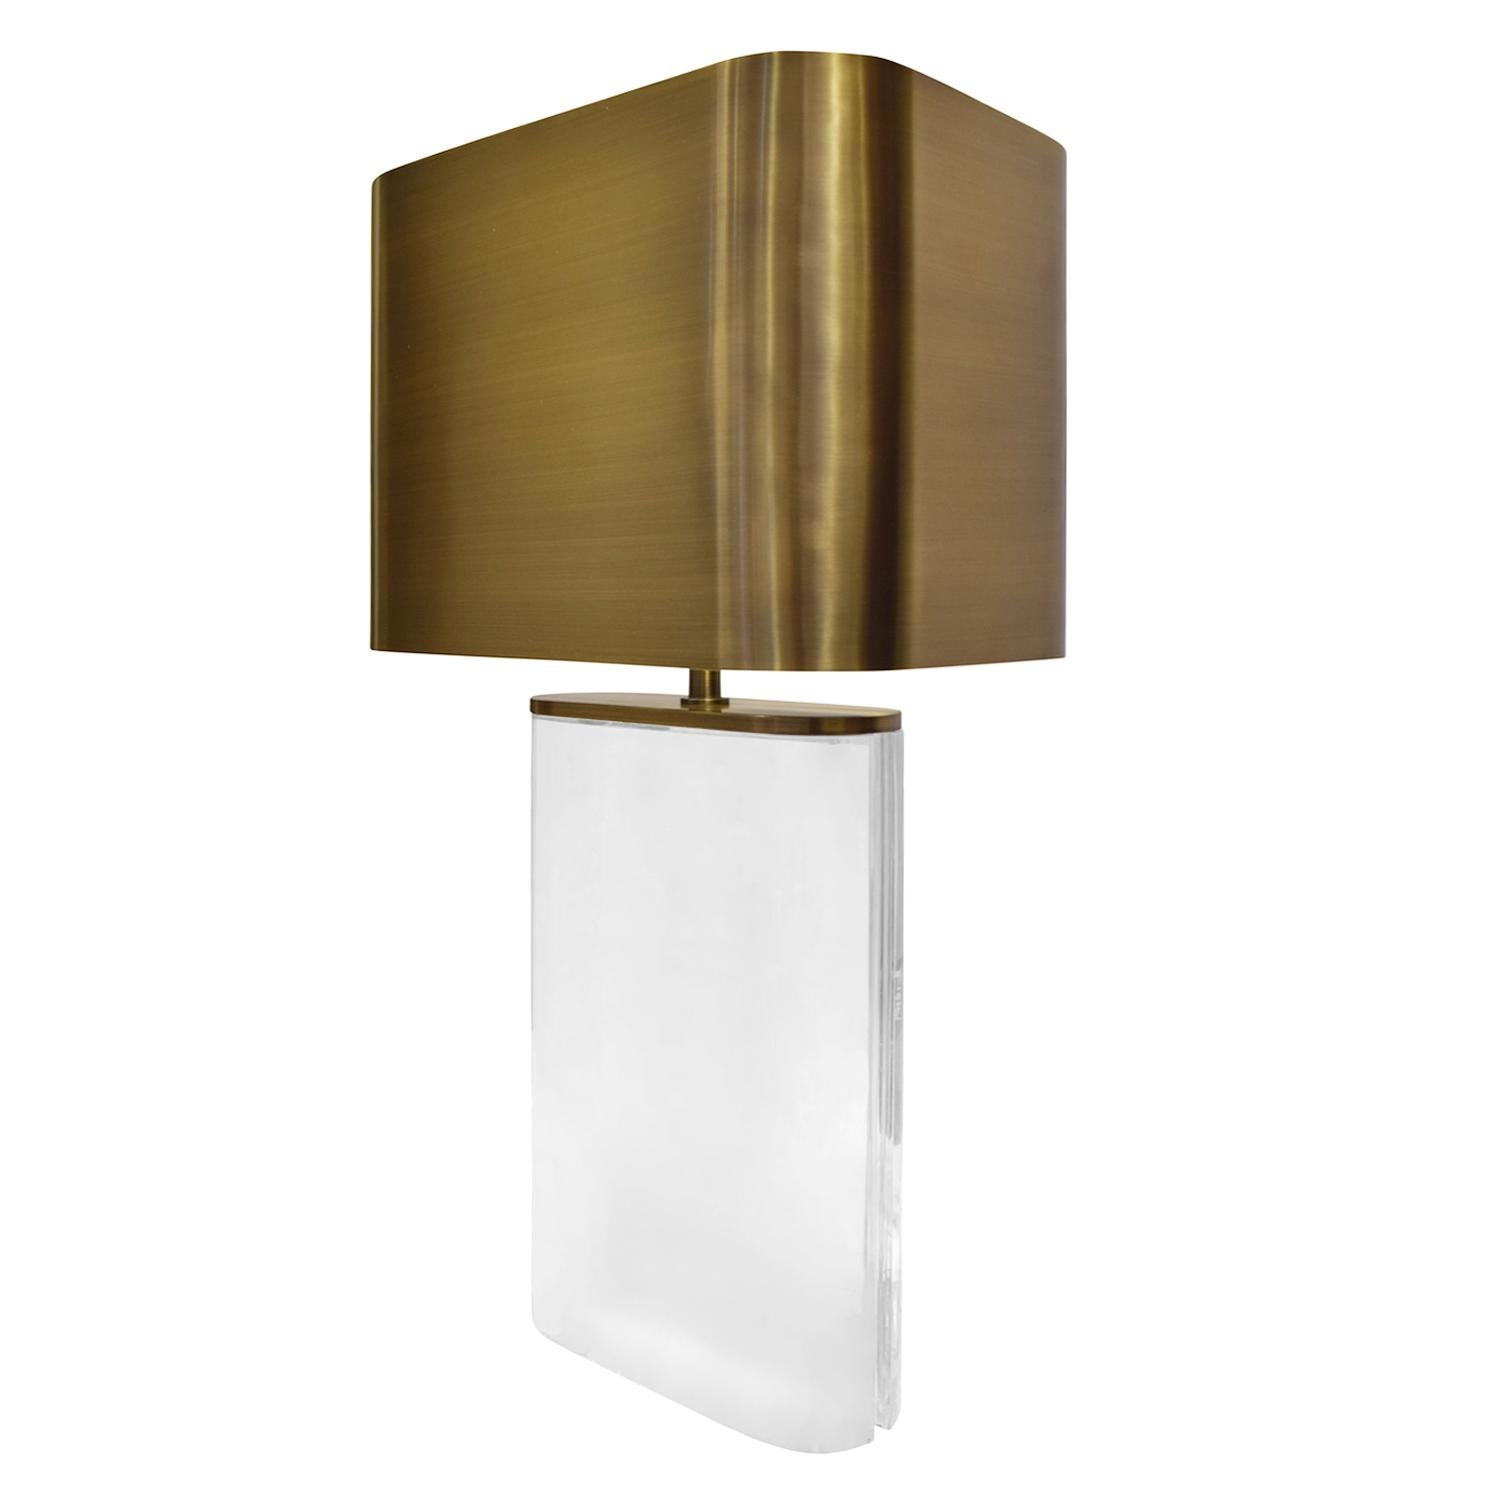 Large solid Lucite table lamp with bronze hardware and shade by Karl Springer, American 1970s. The cord is embedded into the curved side of this lamp so it is not visible from the front. Springer had metal artisans fabricate seamlessly welded metal